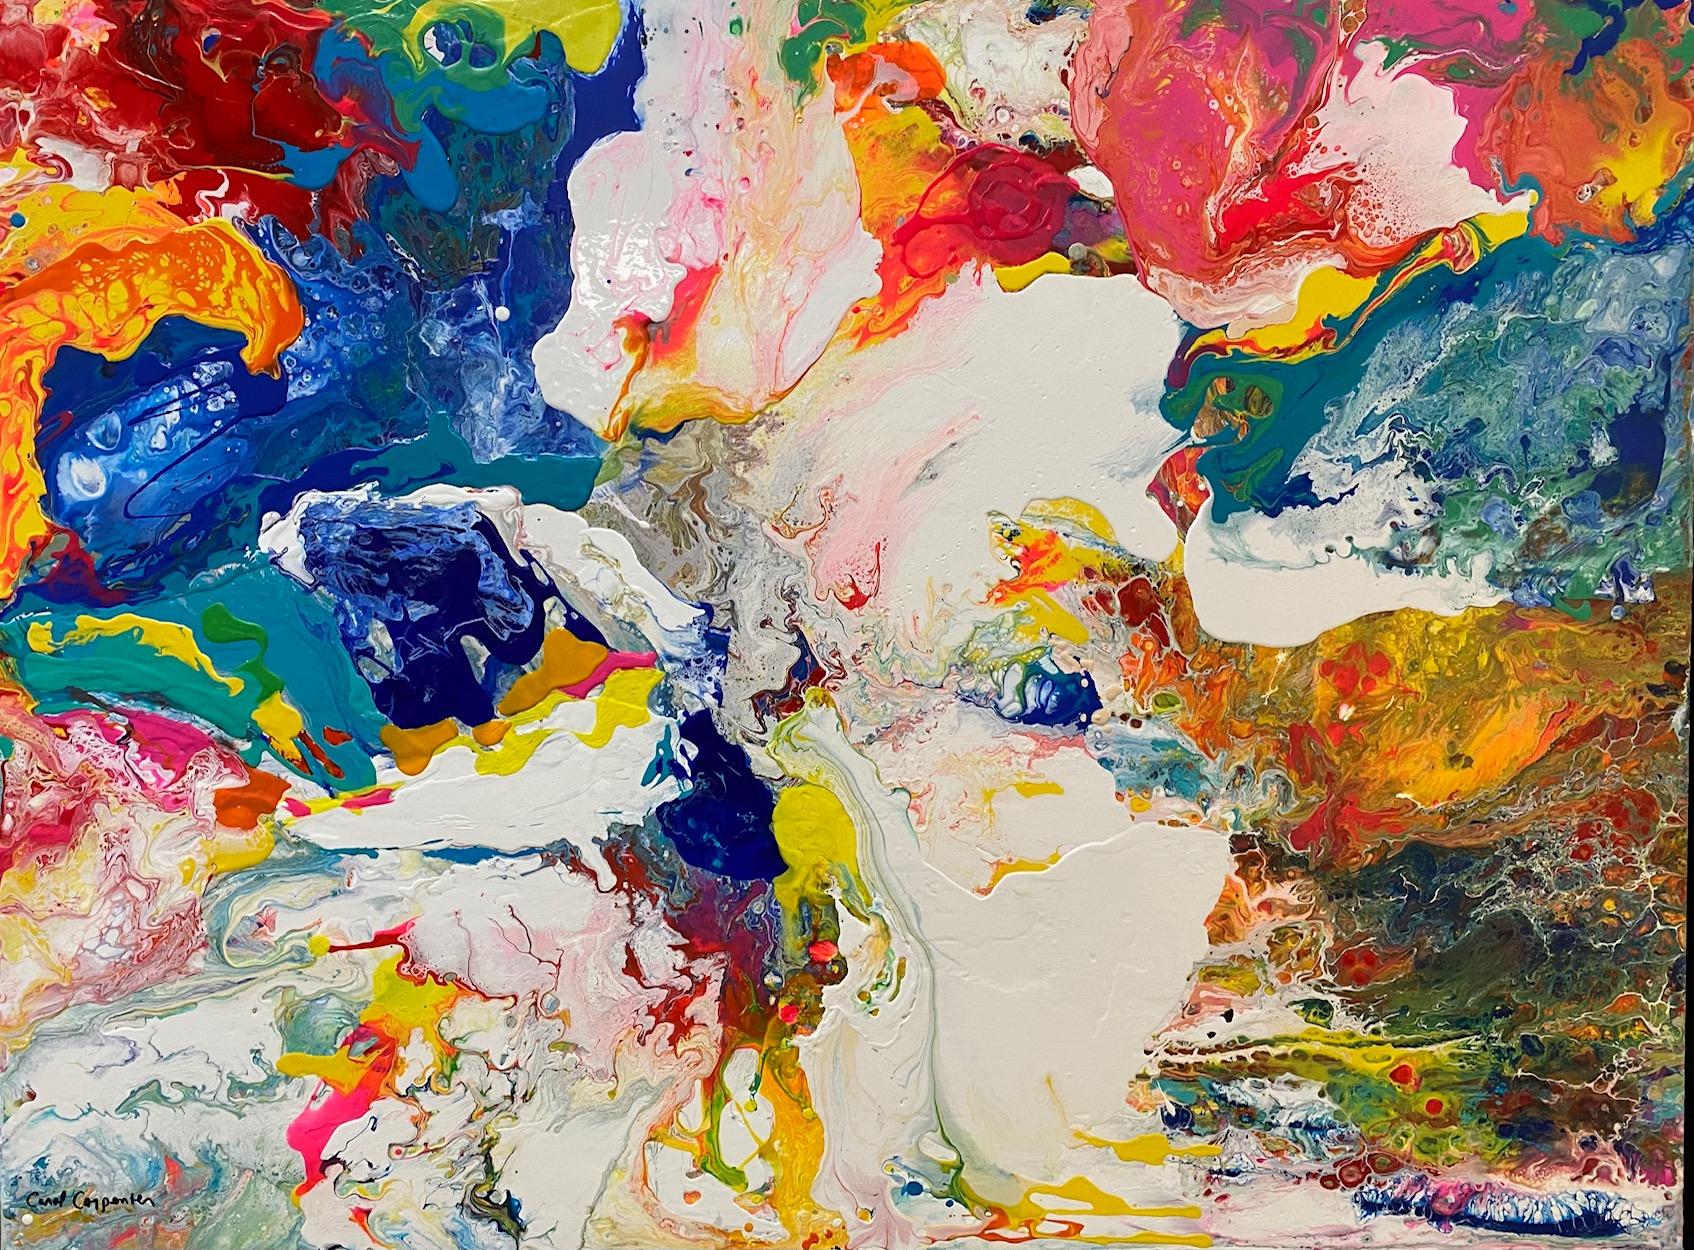 Tropical Depression, original 30x40 abstract expressionist acrylic painting - Painting by Carol Carpenter